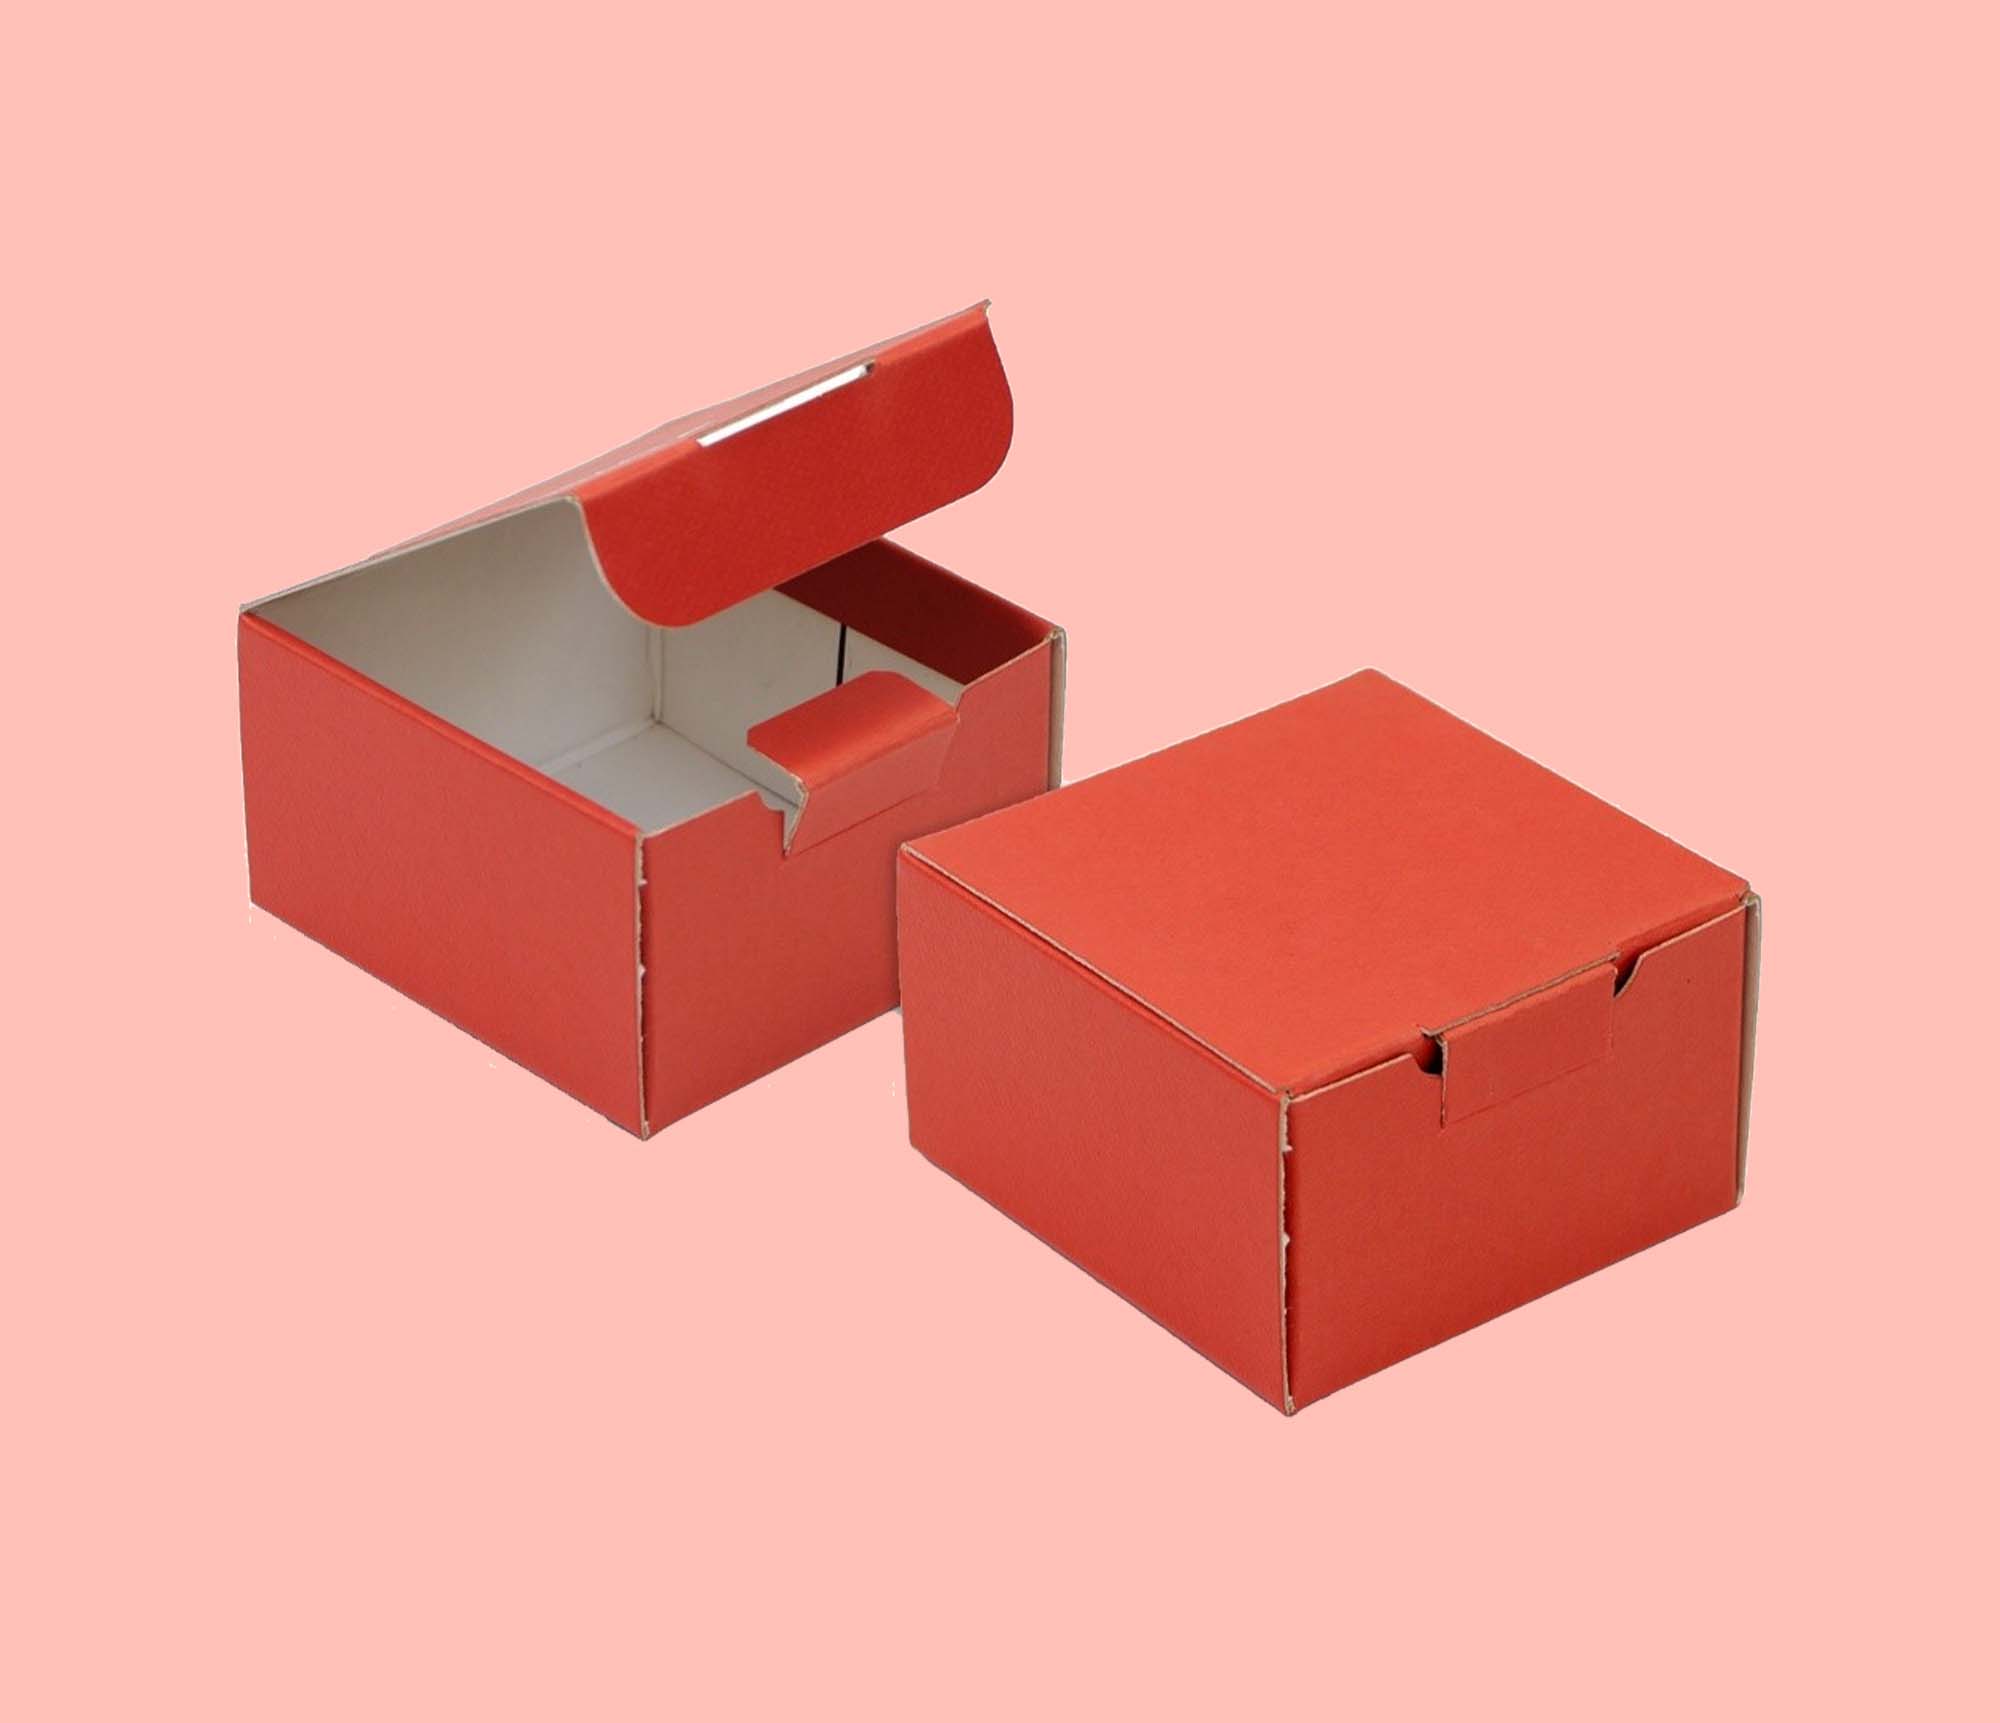 Reverse Tuck End Boxes